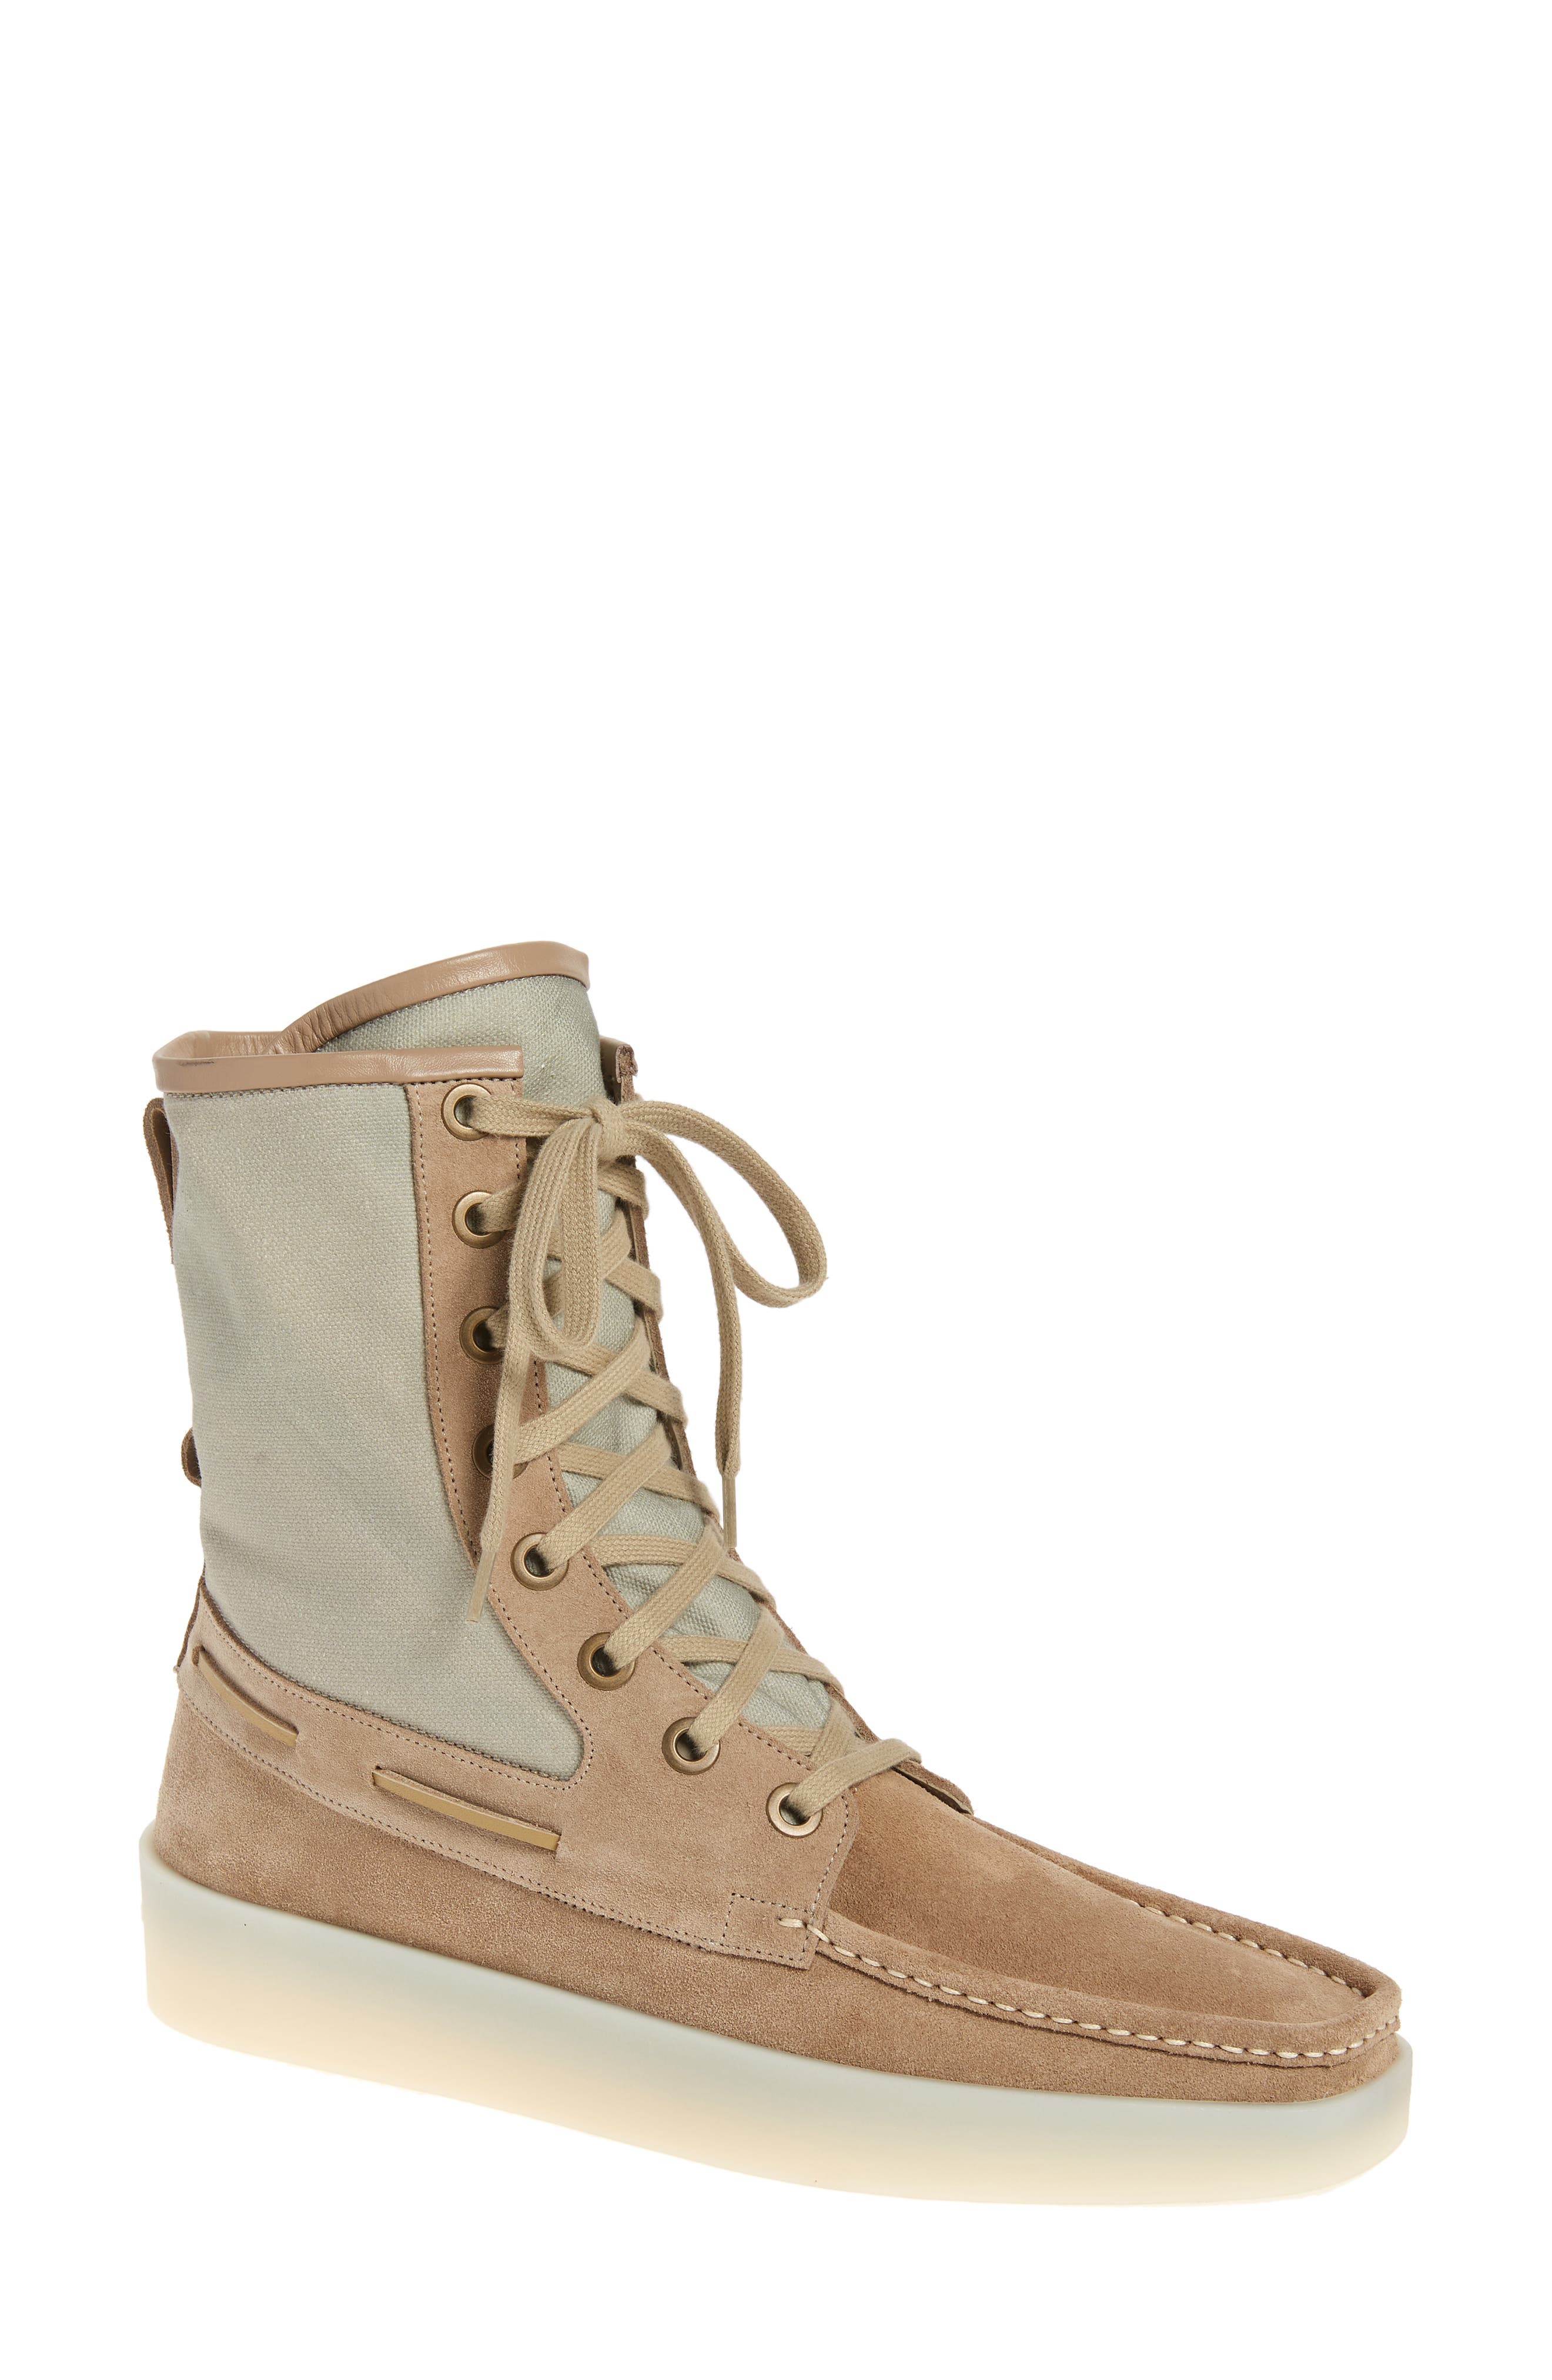 Fear of God Boat Lace-Up Boot in Daino at Nordstrom, Size 9.5W-10Us